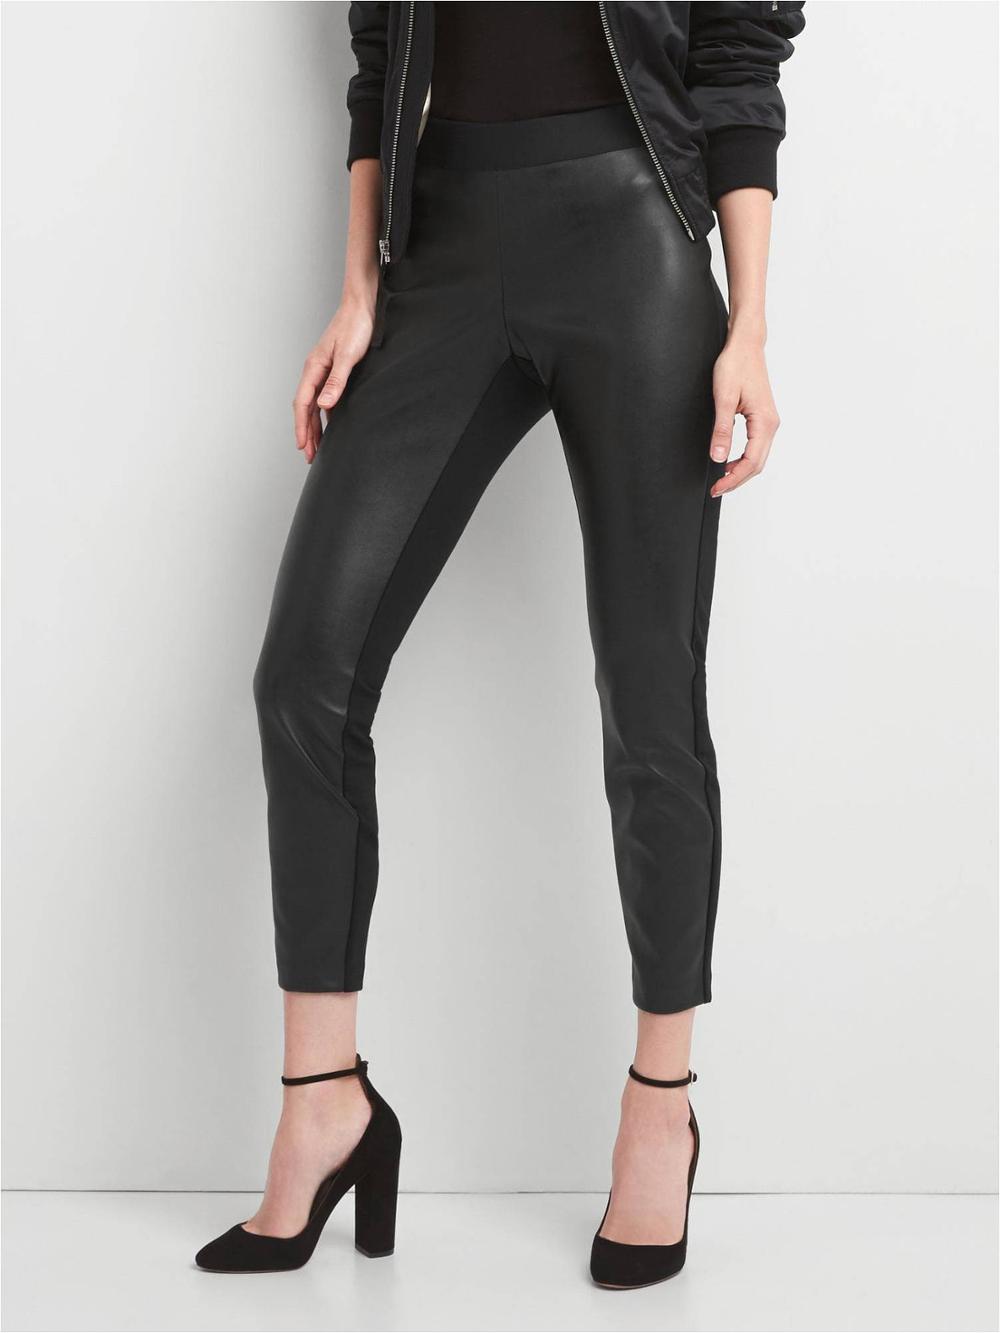 P18E021BW Hot sale fashion classic sexy tight leather pants for women all seasons leather front leggings custom